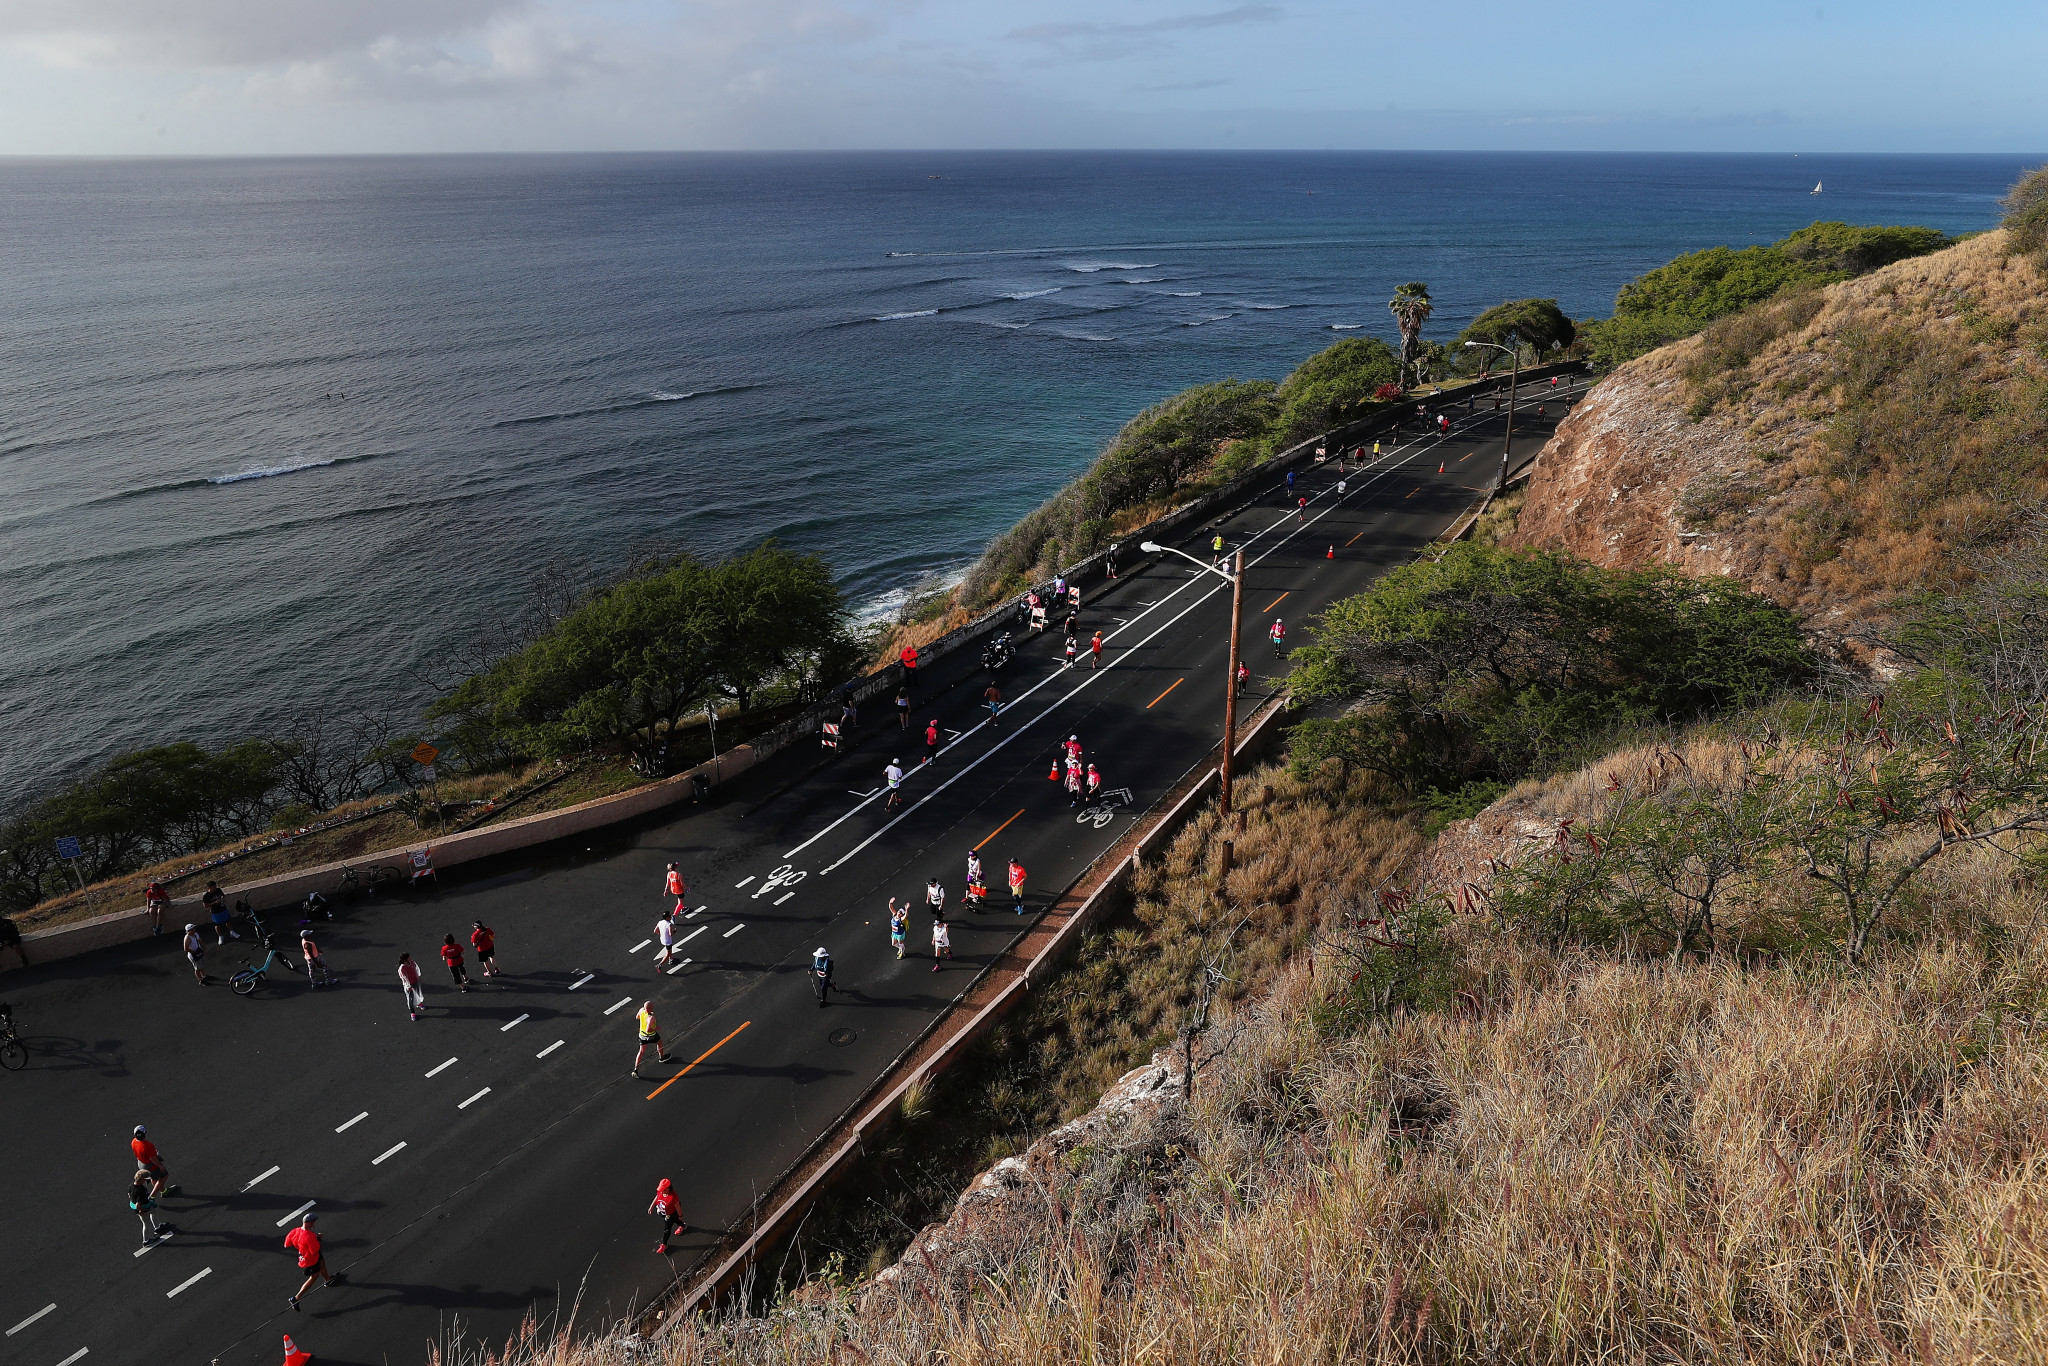 Prior to the 2020 coronavirus-induced cancellation, the Honolulu Marathon had been held every year since 1973 ©Getty Images